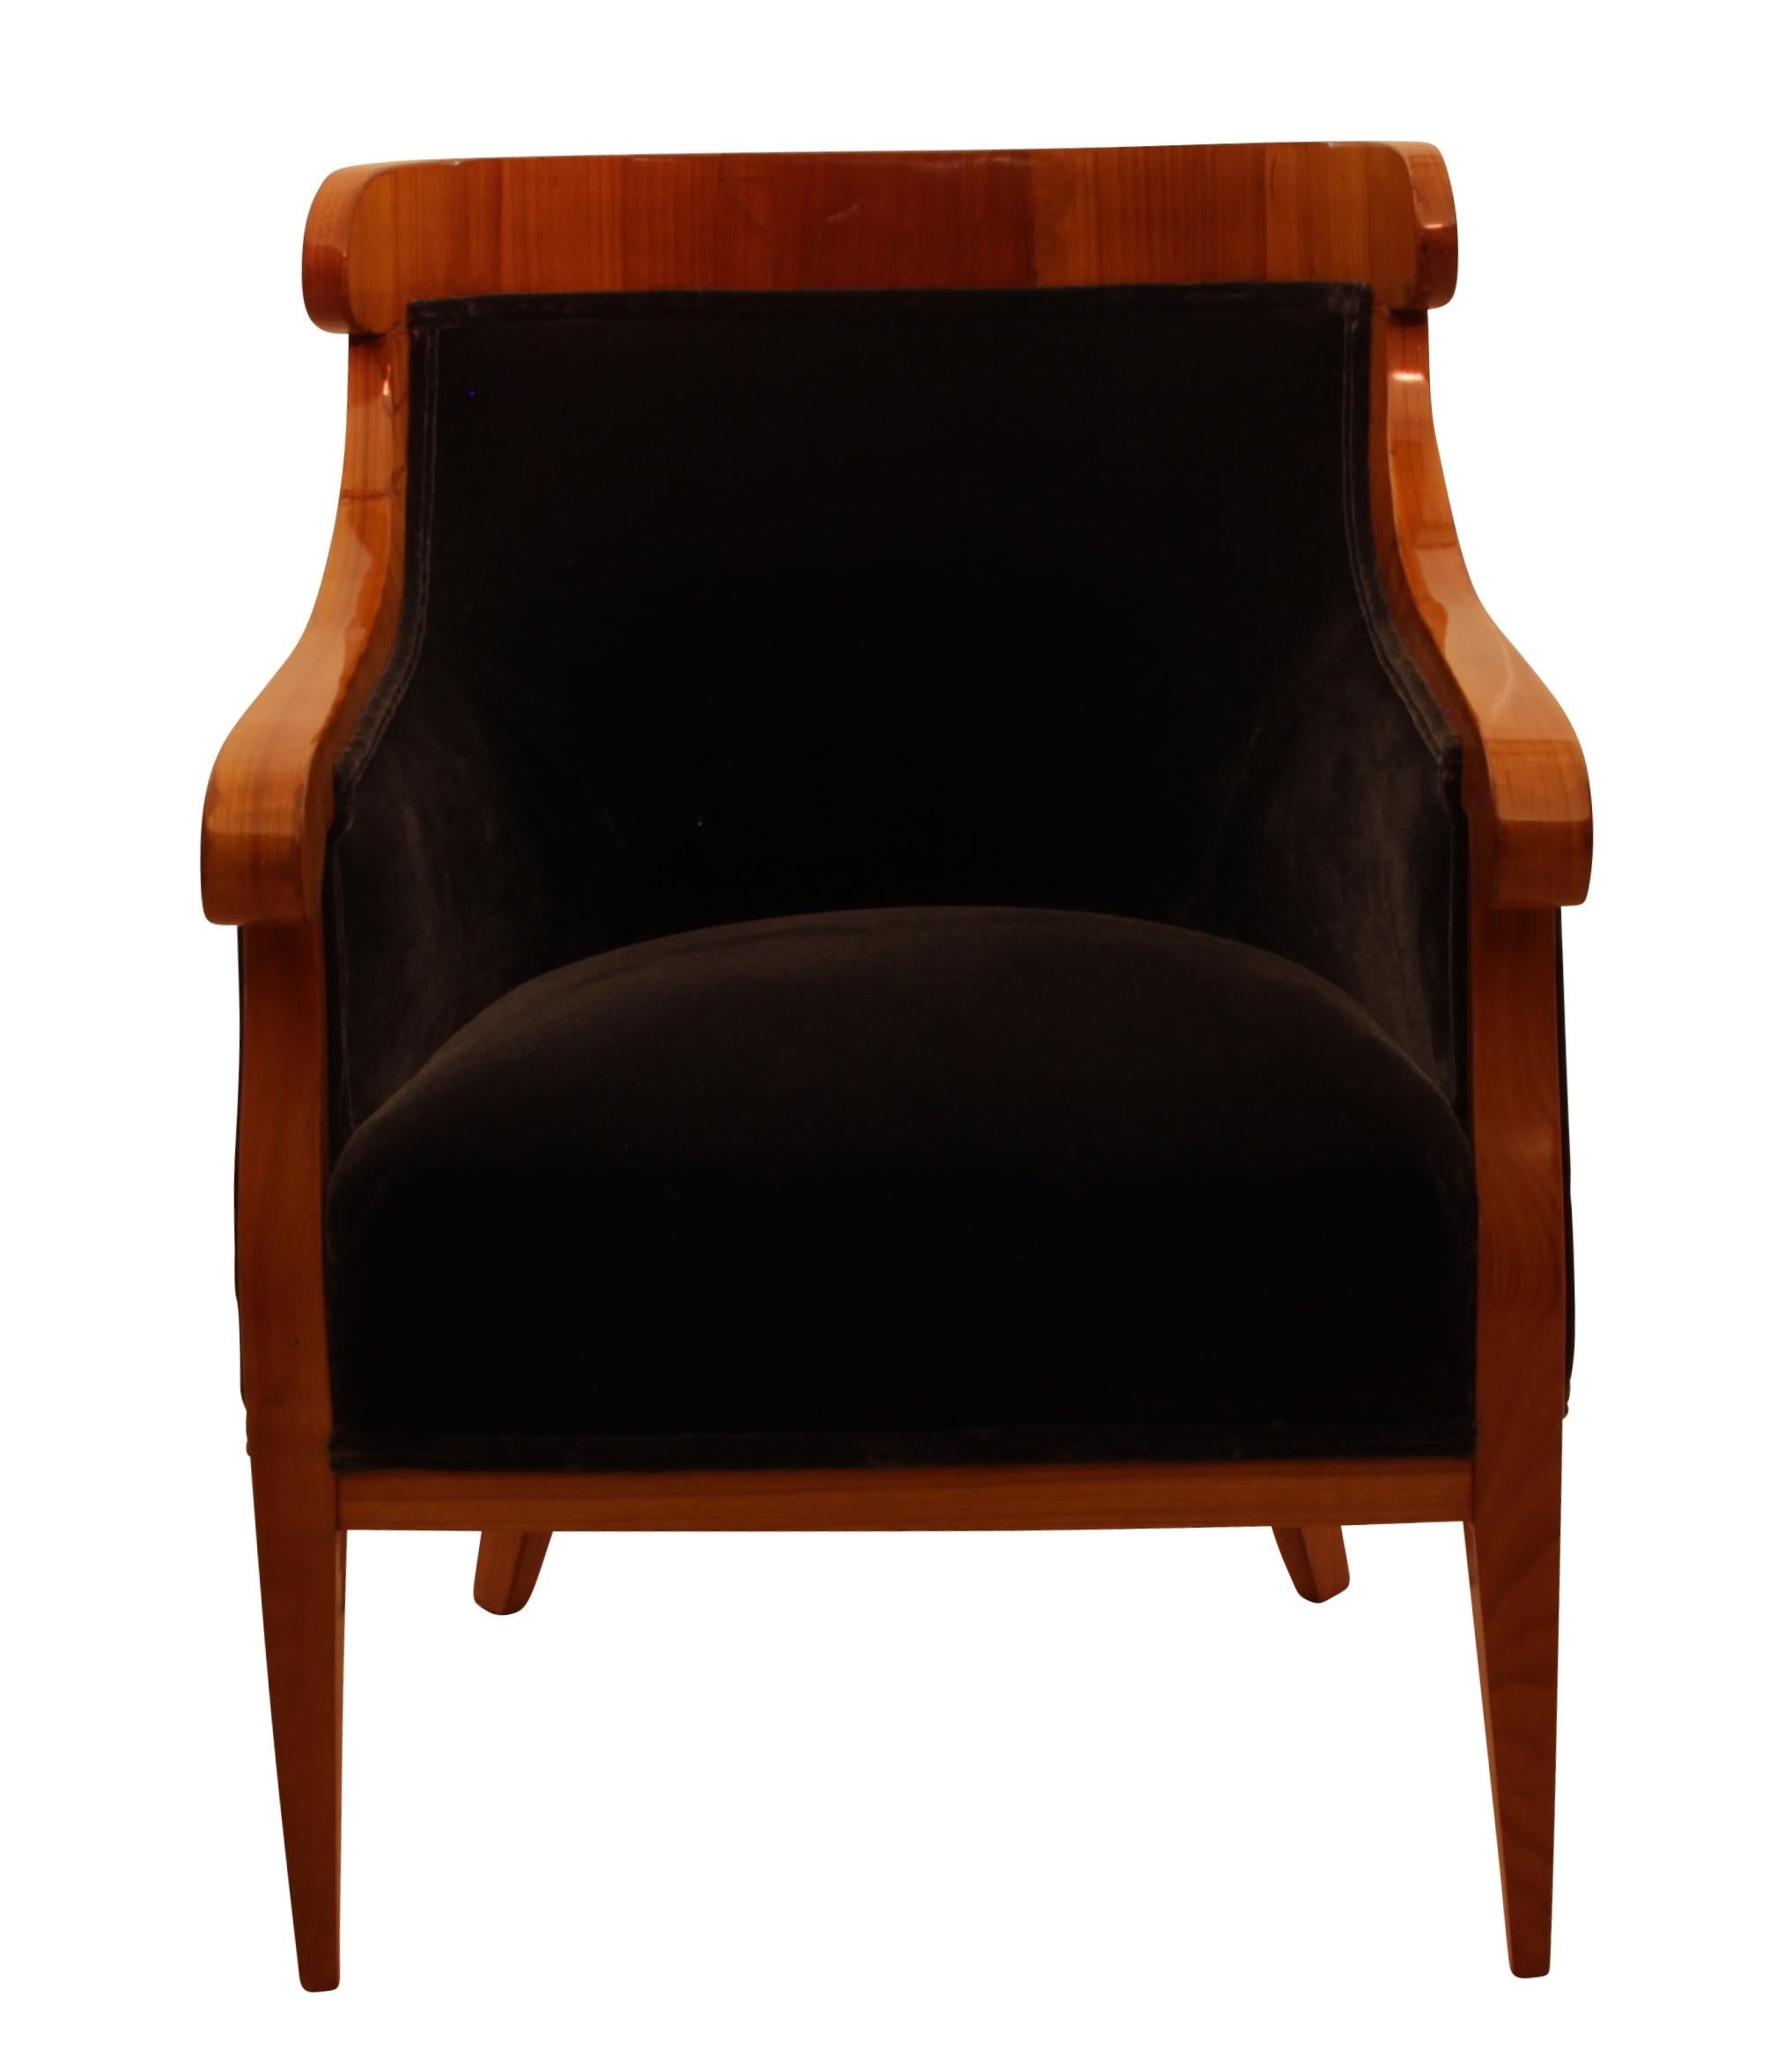 Wonderful and comfortable Biedermeier Bergère Chairs / Armchair from Austria/Vienna around 1830.

Very elegant design with conical, curved 4-edged legs made of cherry solid wood.

Vertically standing cherry veneer at the back- and armrest. 